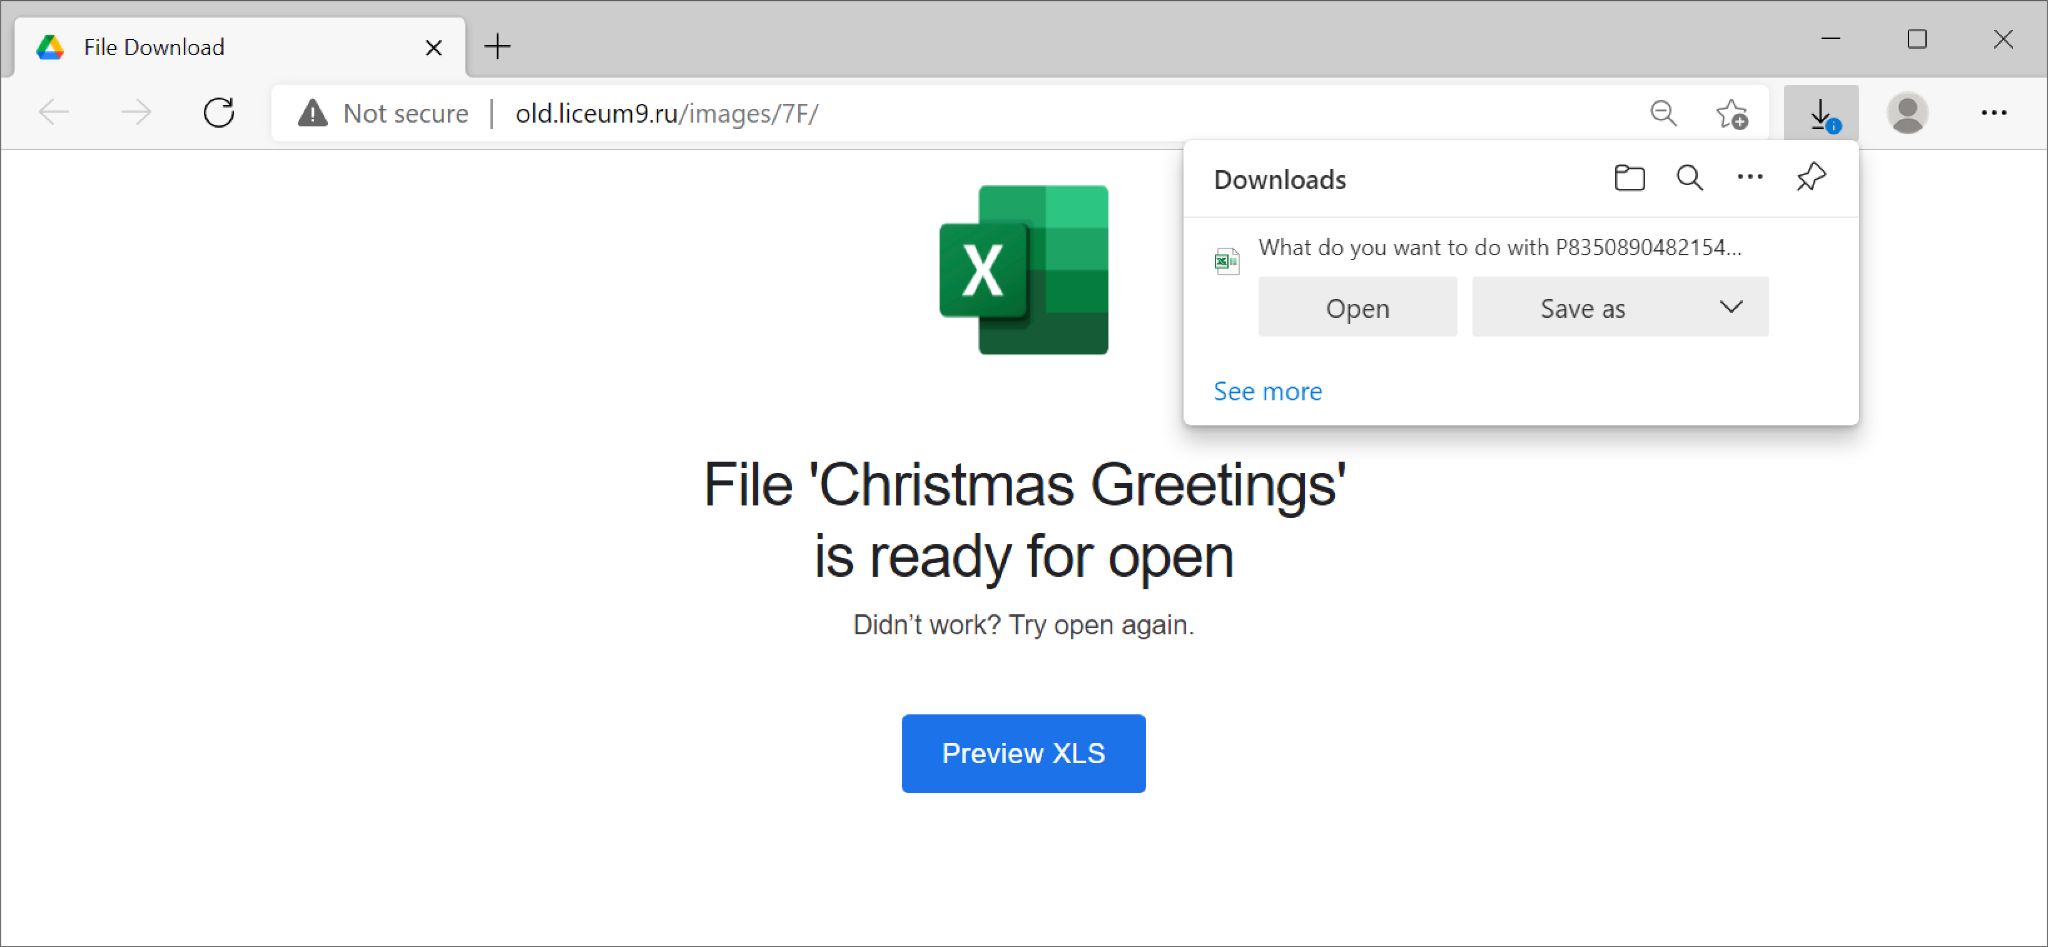 Website delivering a malicious Excel spreadsheet leading to Emotet. The page says, "File 'Christmas Greetings' is ready for open."